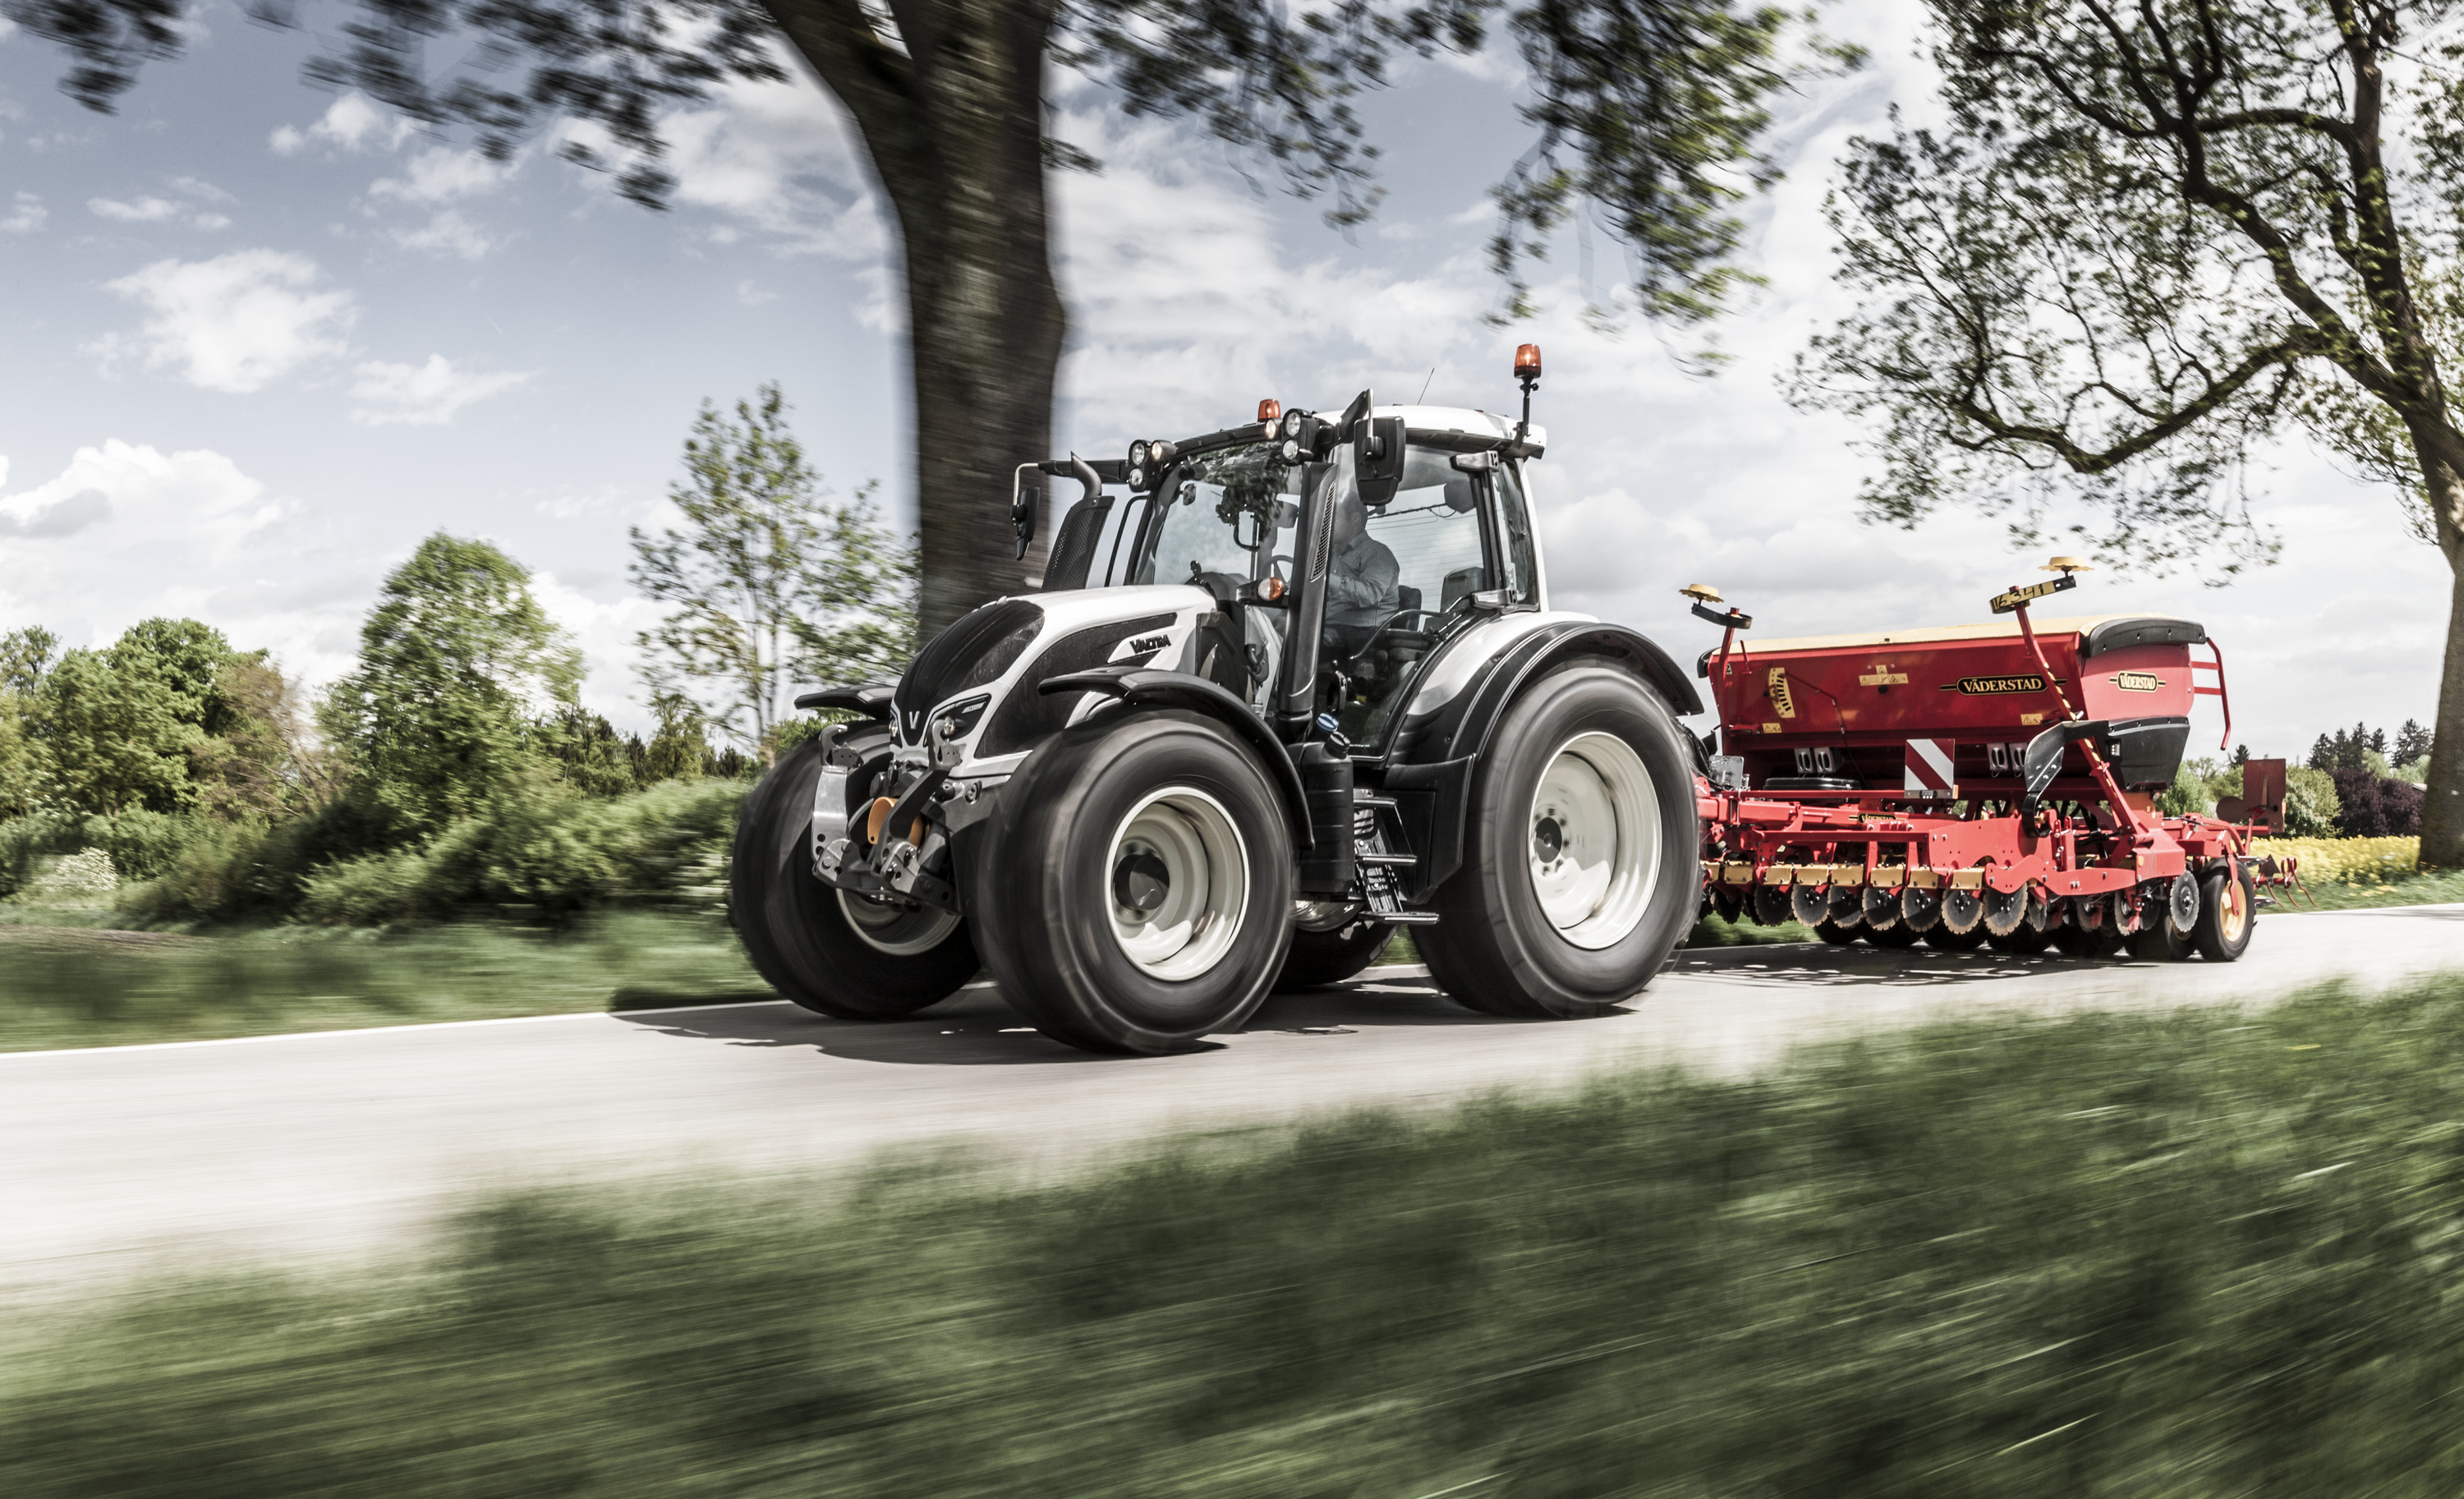 HQ Valtra Wallpapers | File 1313.3Kb